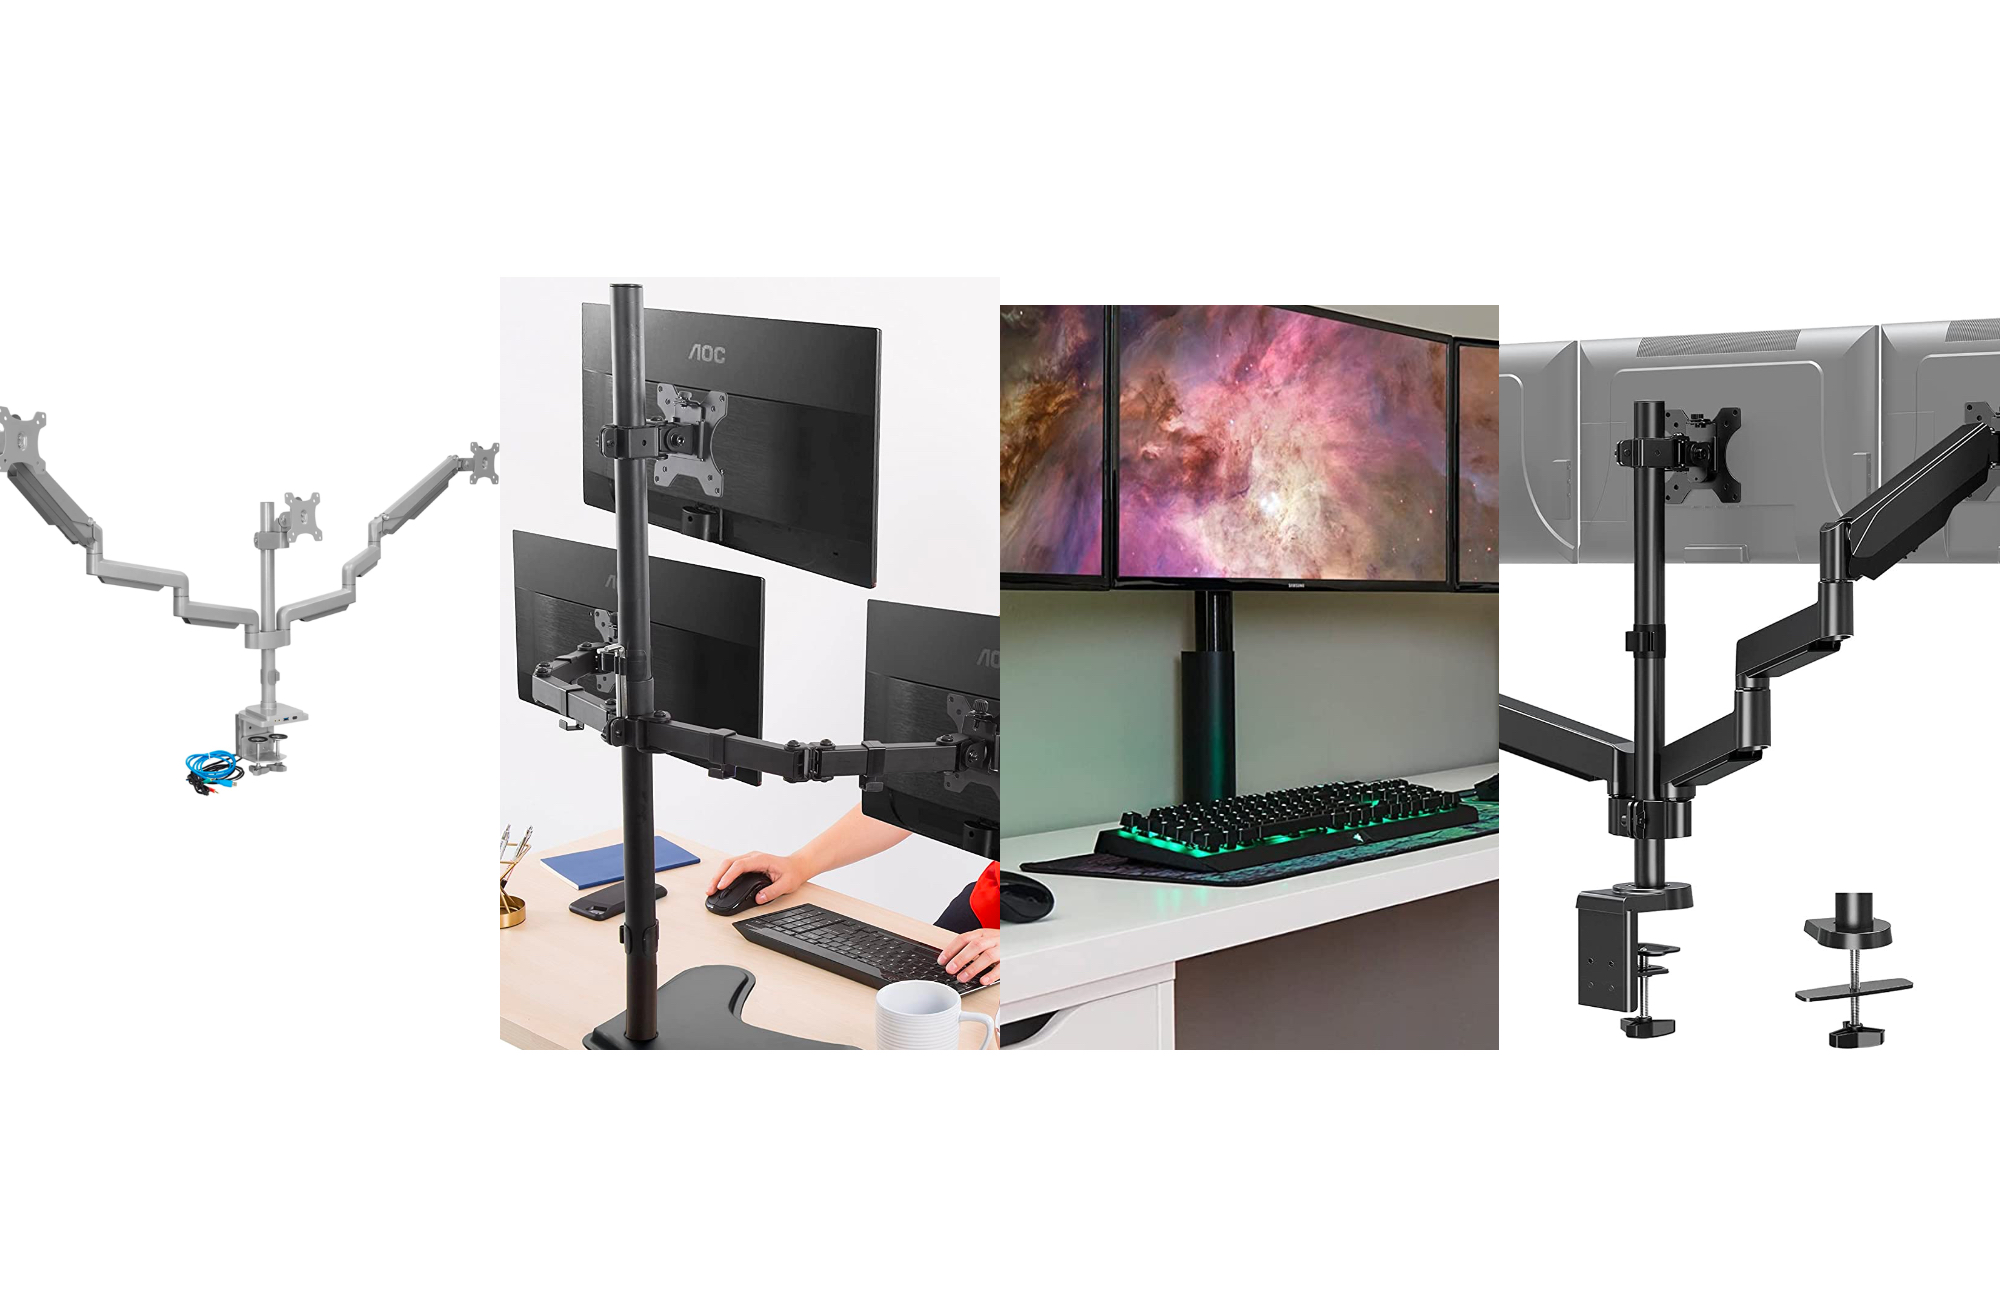 Desk Mount Monitor Arm for 32in Display - Monitor Mounts, Display Mounts  and Ergonomics